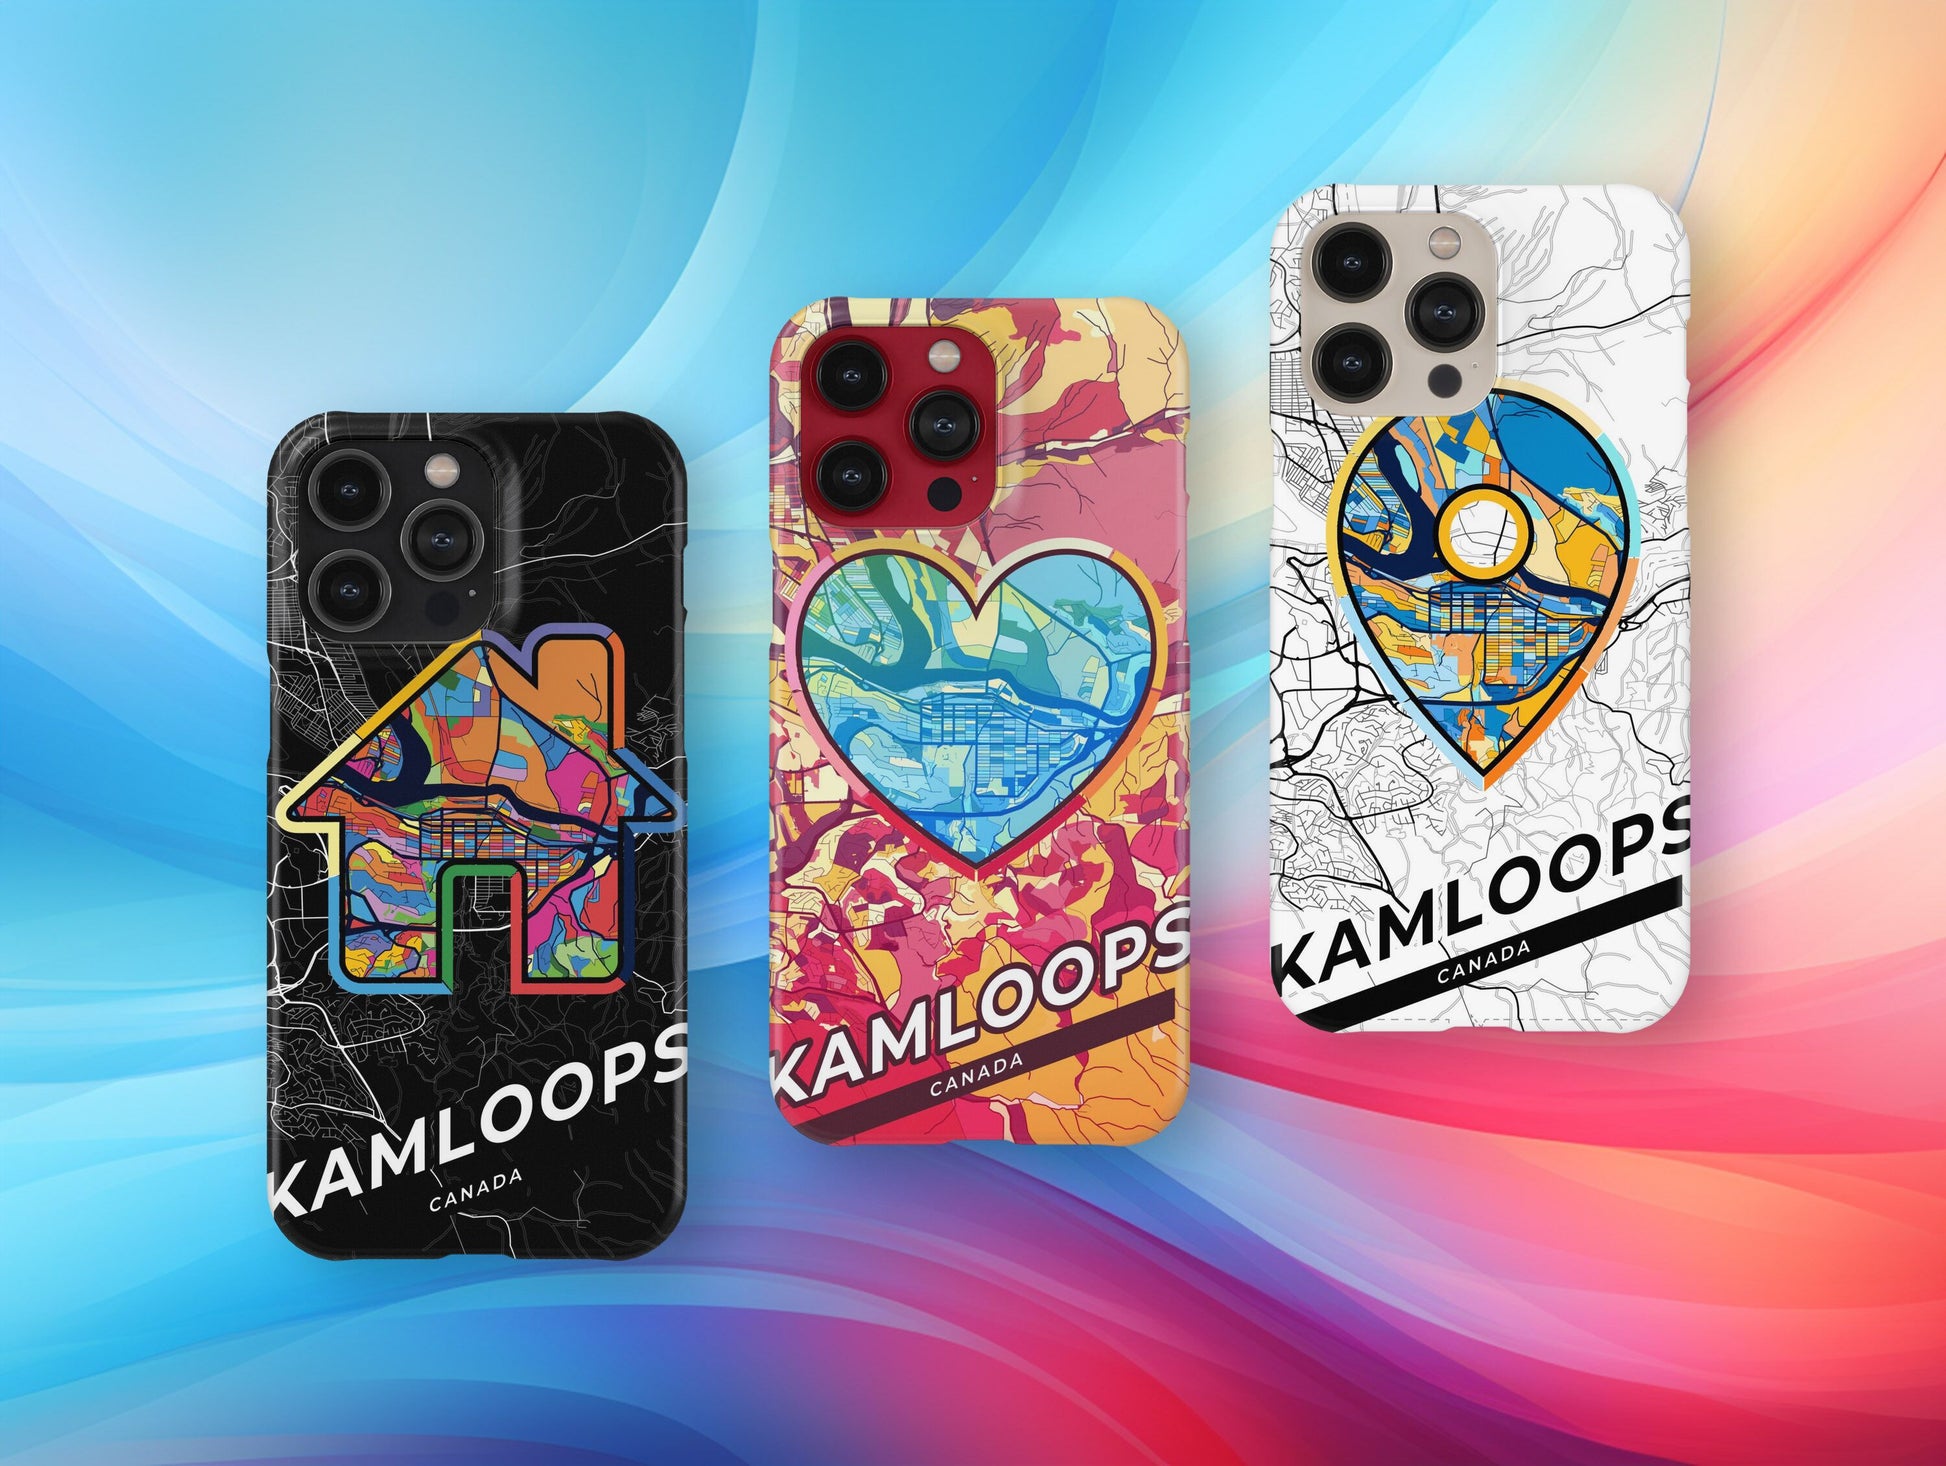 Kamloops Canada slim phone case with colorful icon. Birthday, wedding or housewarming gift. Couple match cases.